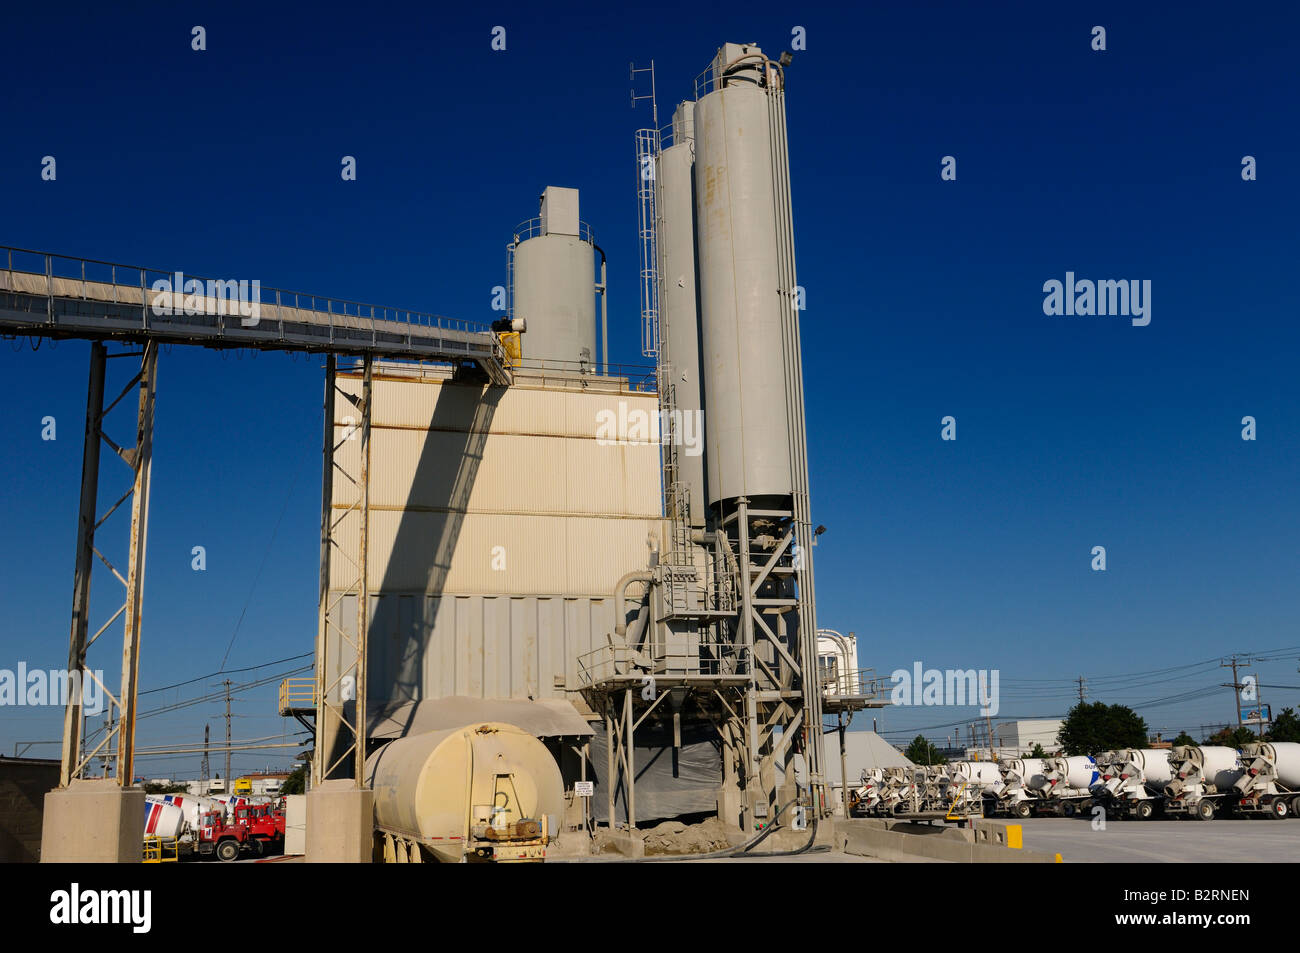 Toronto cement factory kiln and silos with waiting cement trucks with